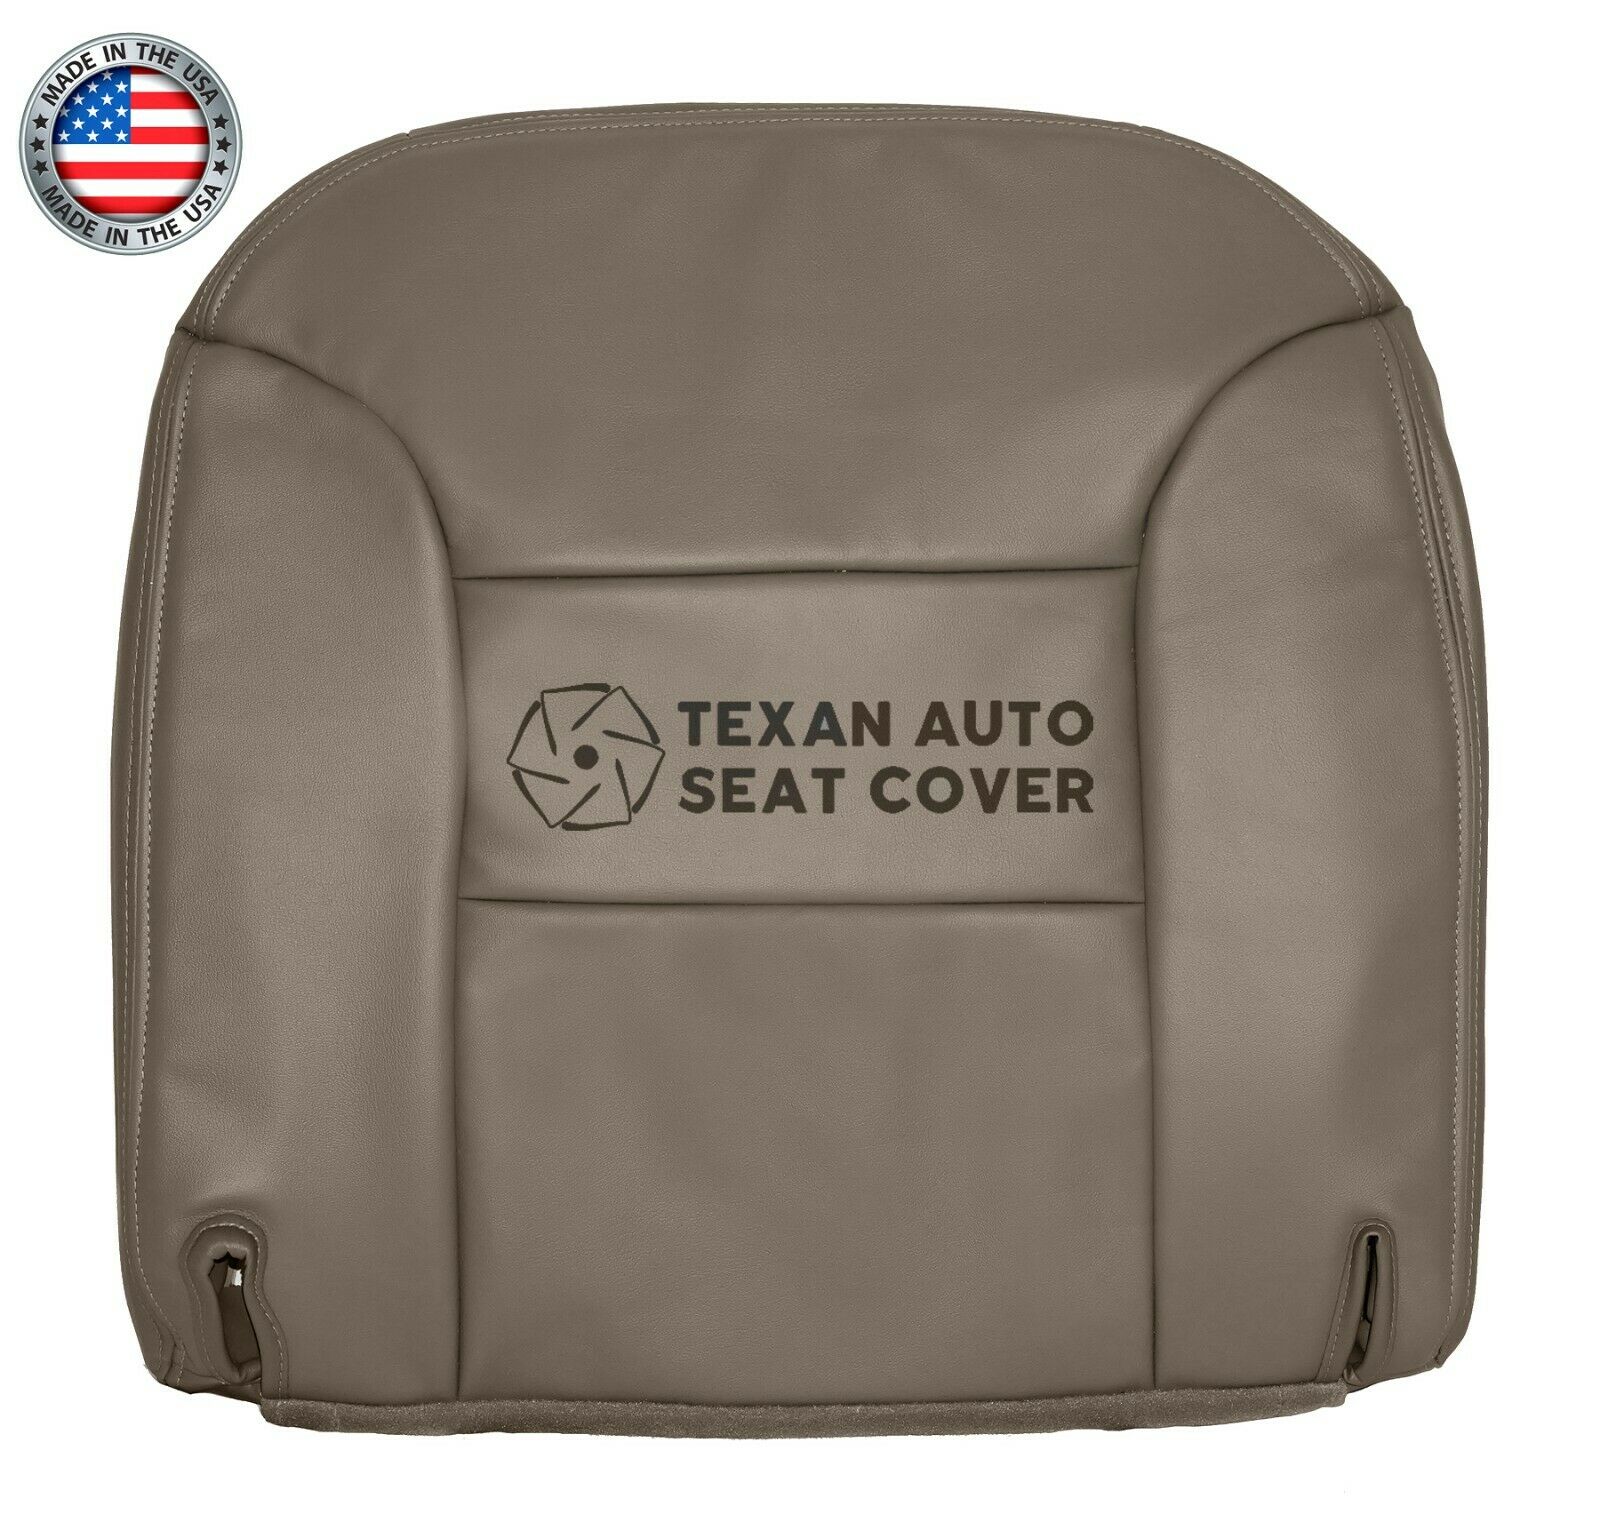 2000,GMC Sierra C/K 2500 3500 Classic SLT SLE  Z71 Driver Side Bottom Leather Replacement Seat Cover Tan